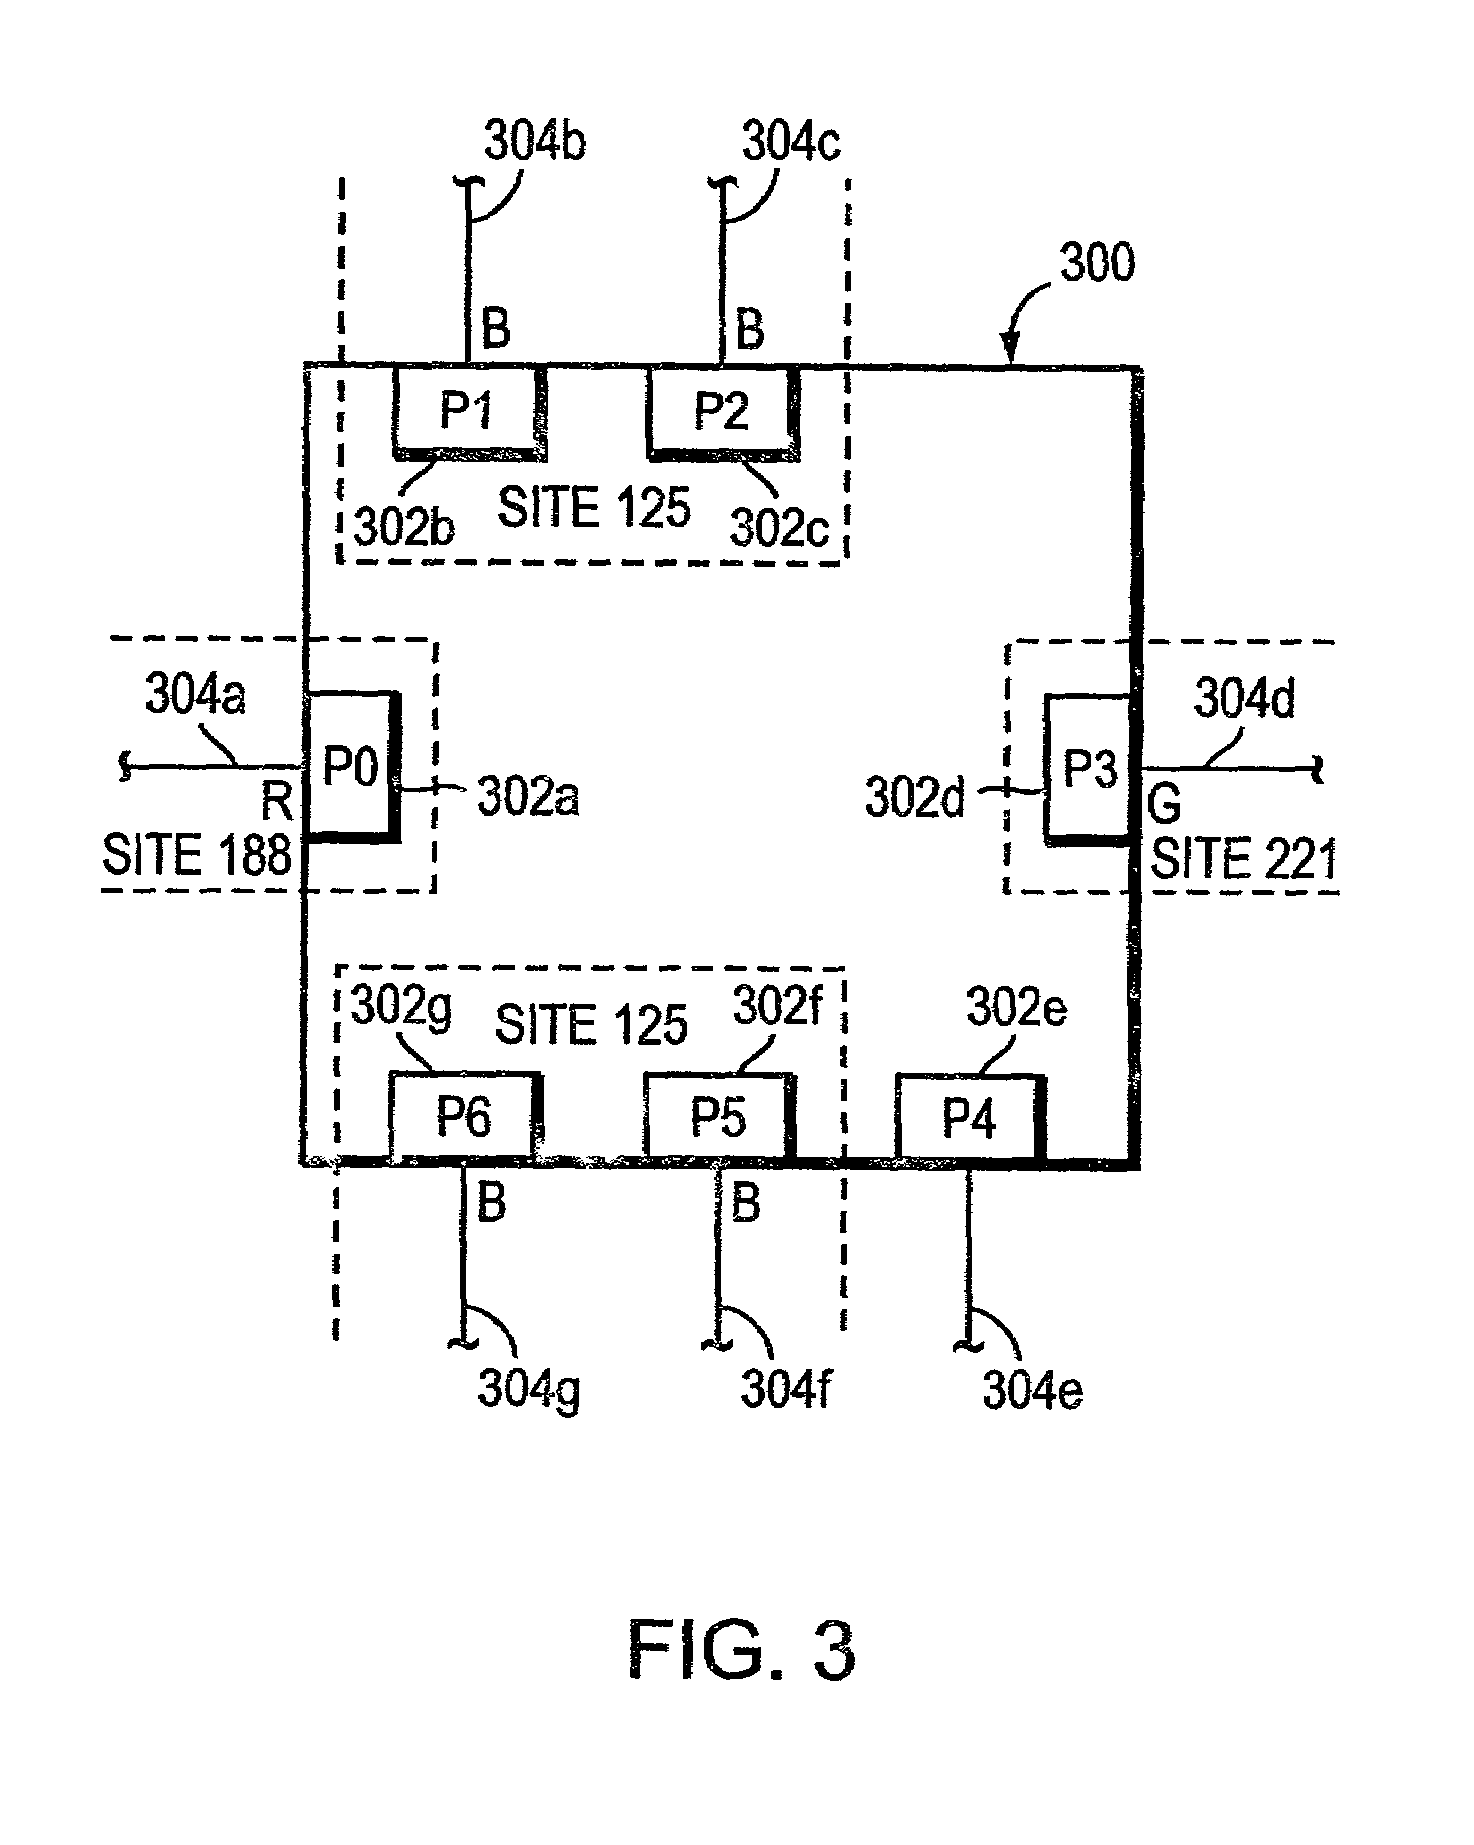 System and method for mapping an index into an IPv6 address